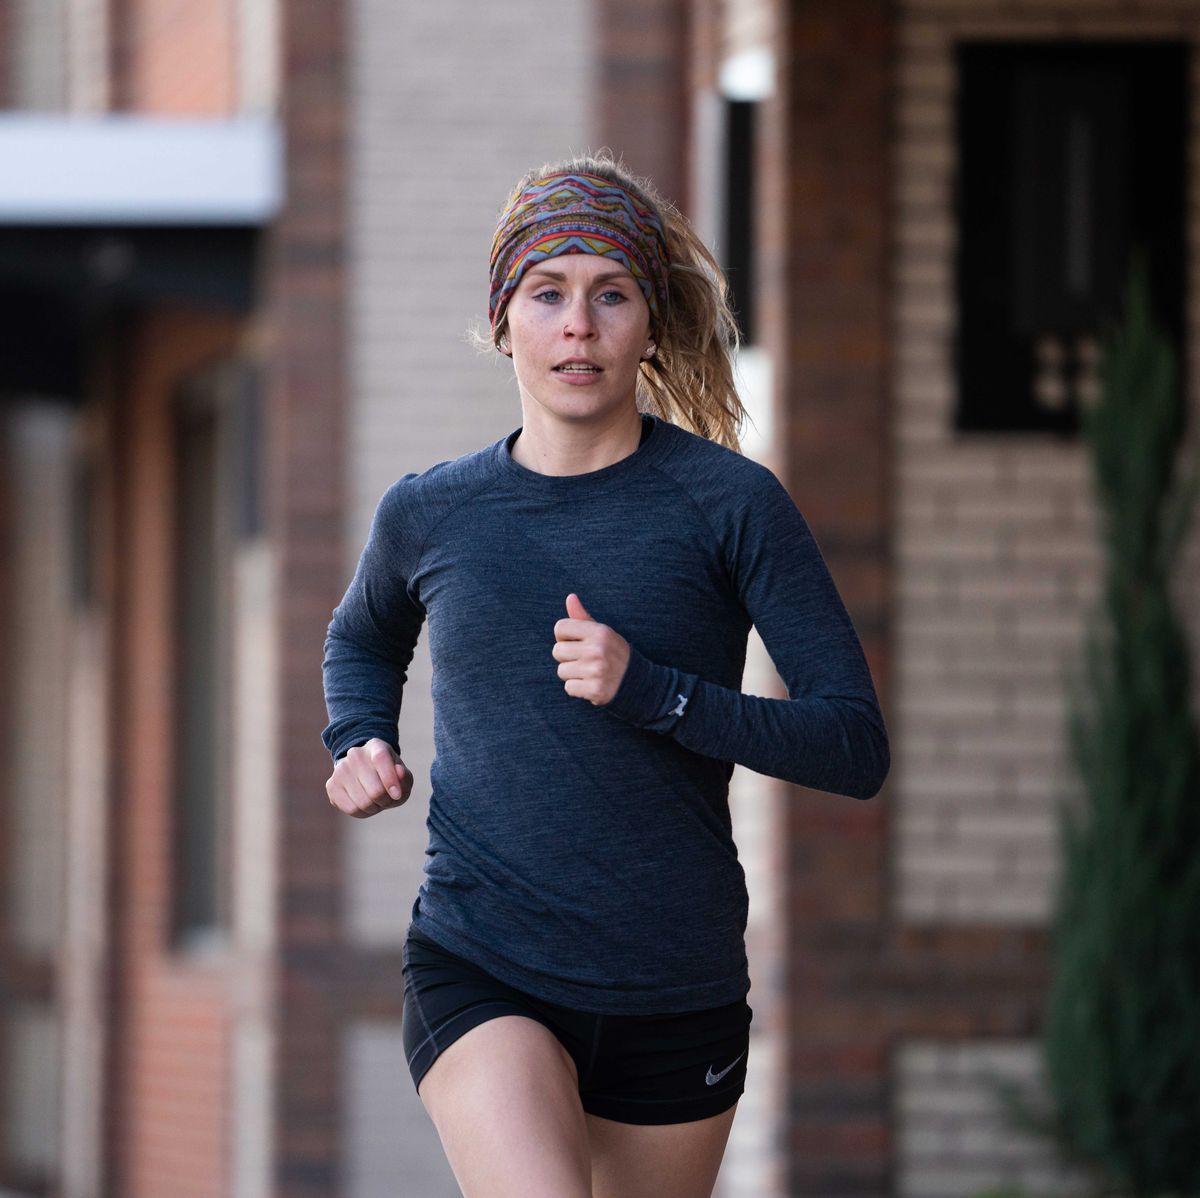 How Gaining Weight Helped Me Run Half Marathons Faster Than Ever Before